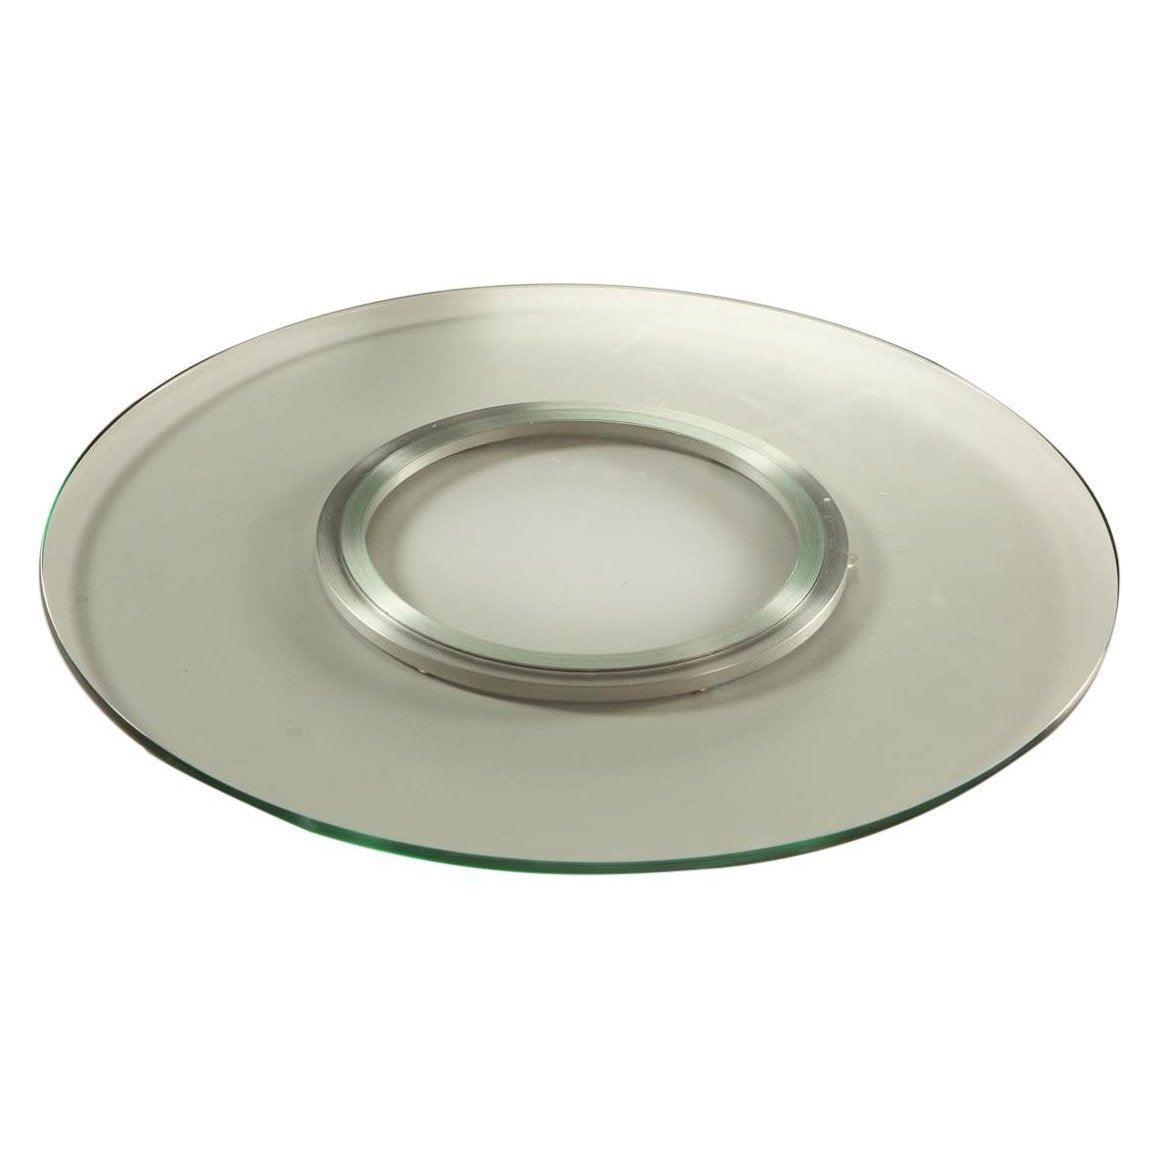 TamBee Lazy Susan Hardware Lazy Susan Bearing 14 Inch Comercial